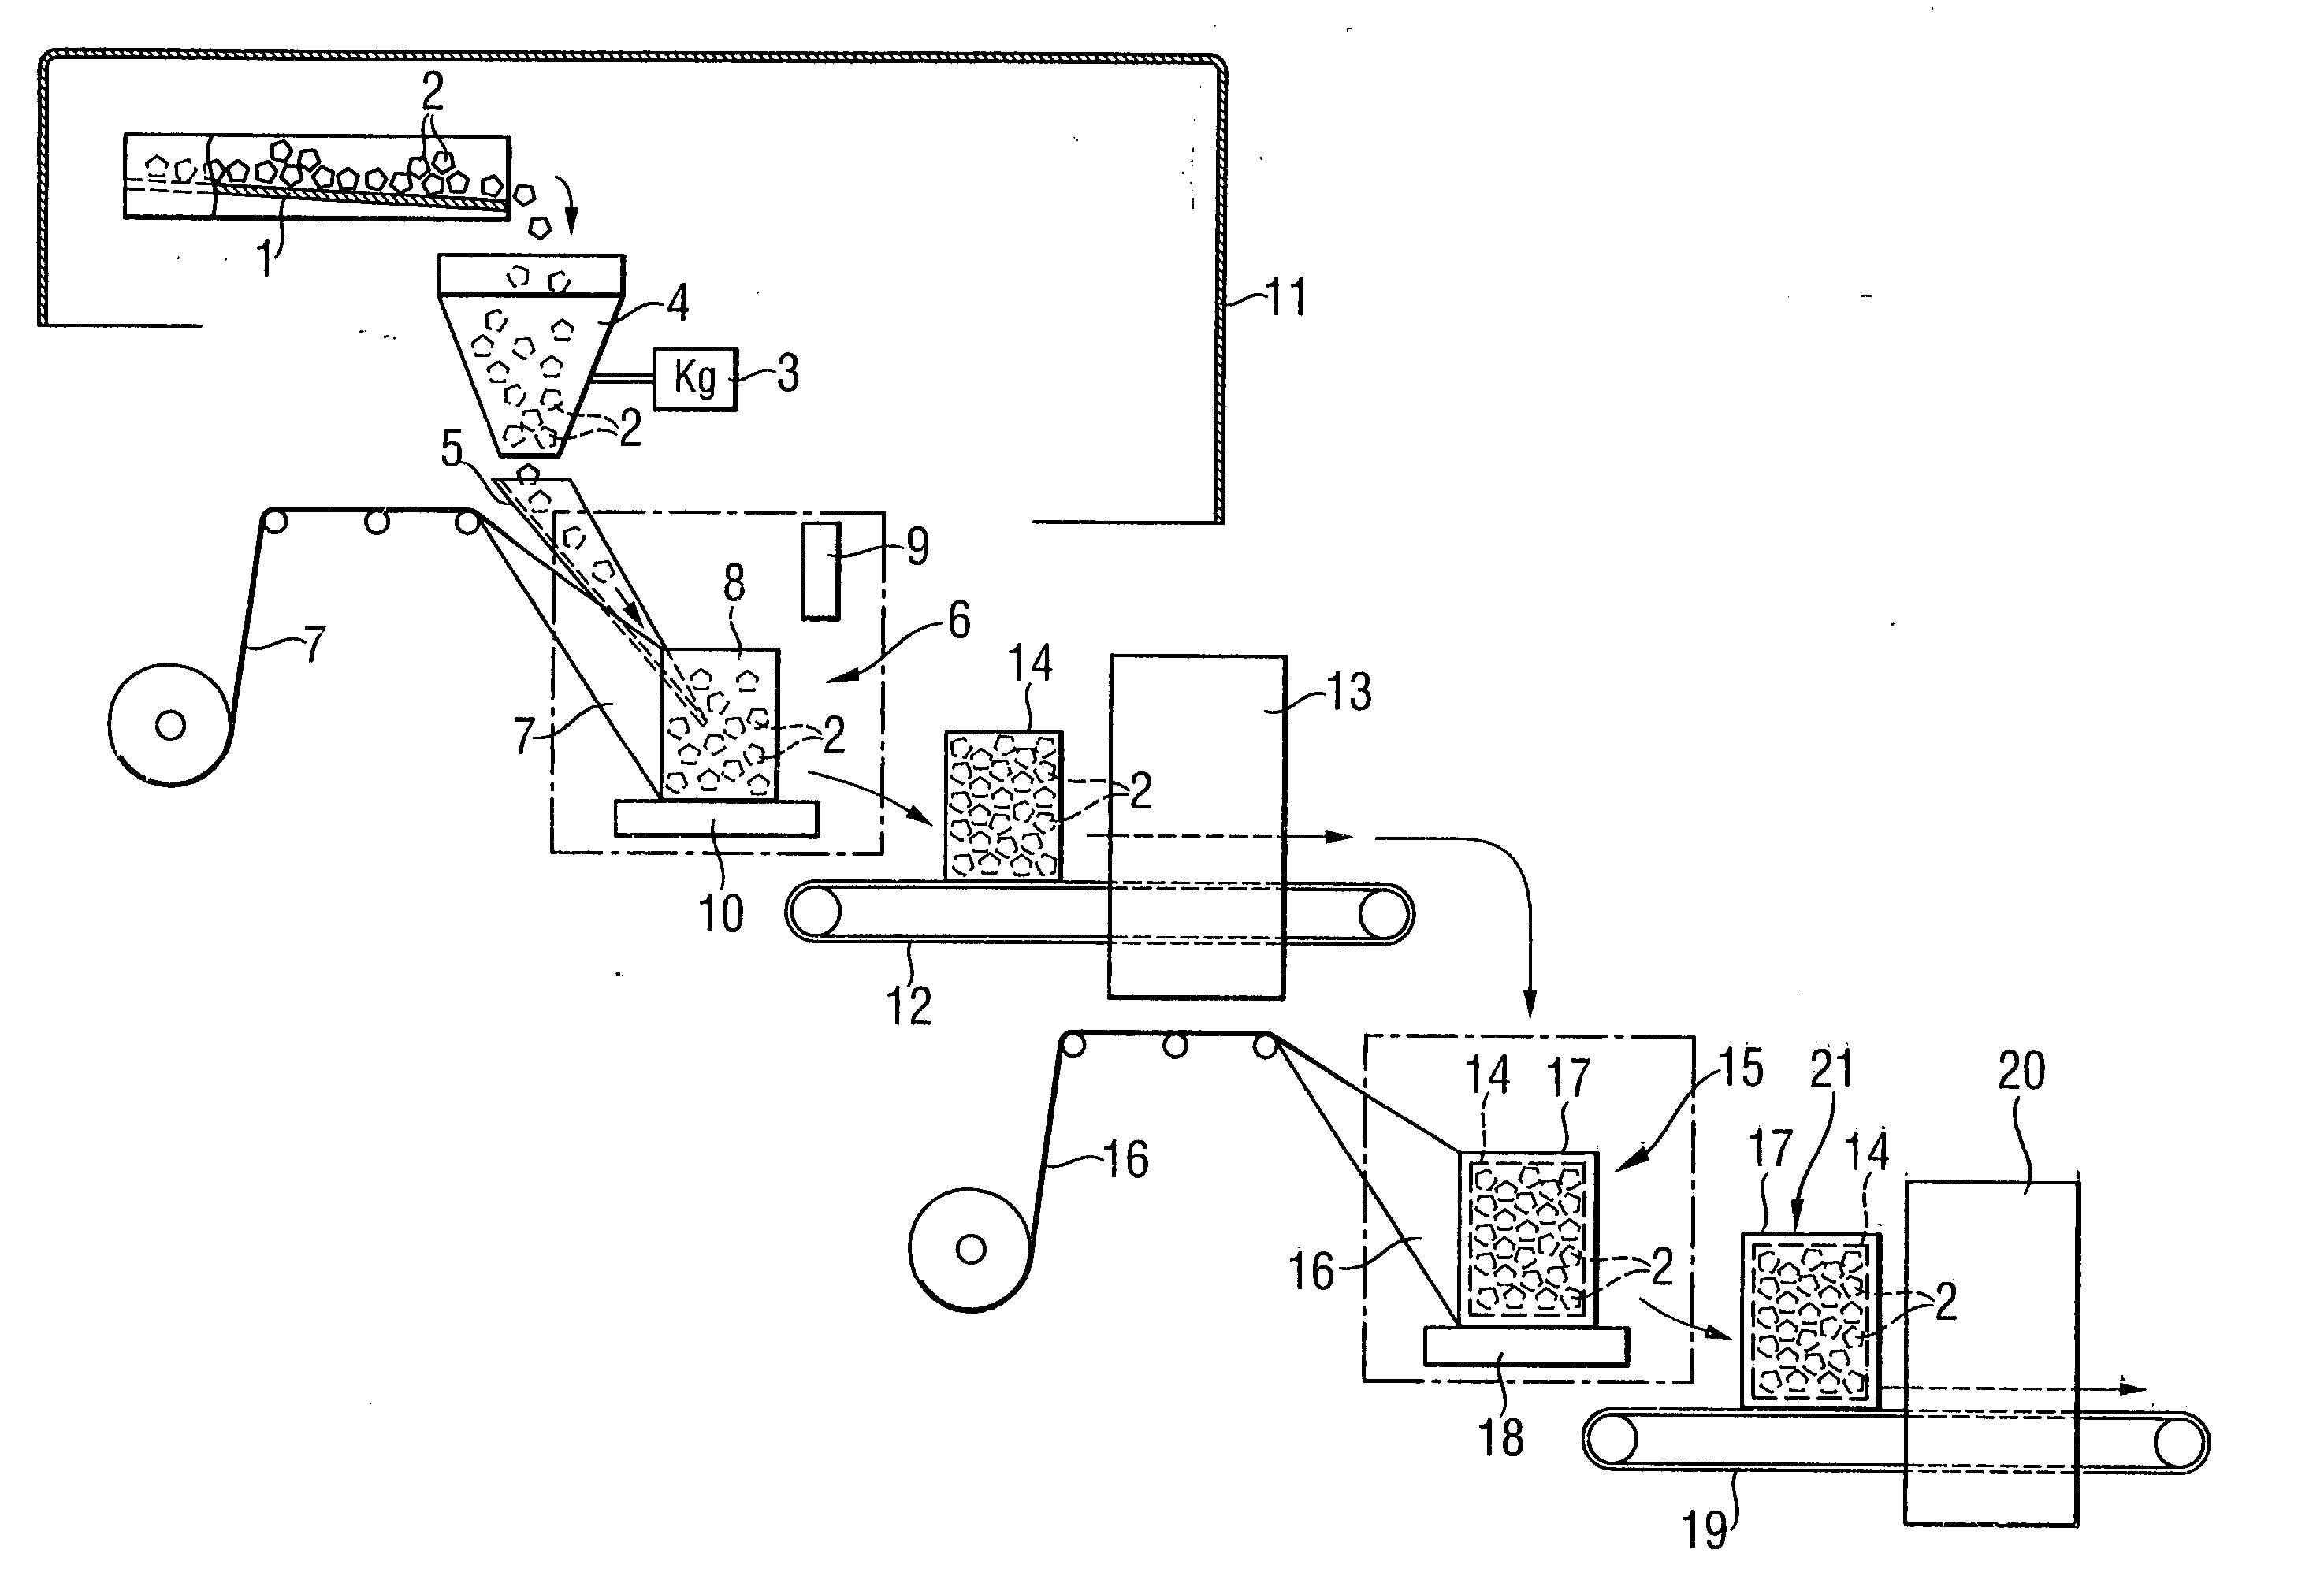 Process and apparatus for the cost-effective packaging of polysilicon fragments